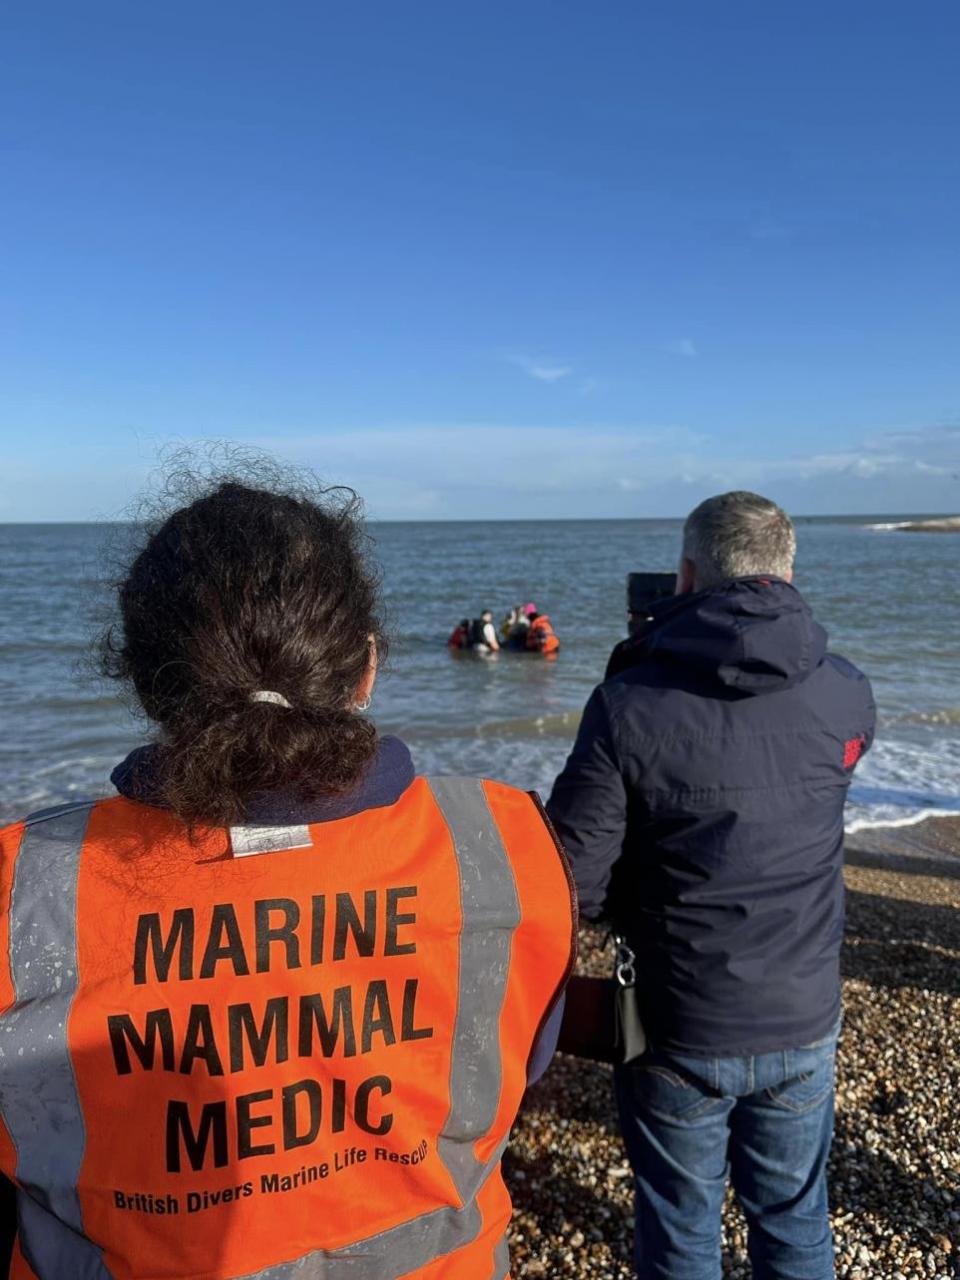 The Argus: The team tried to get the dolphin back into the sea